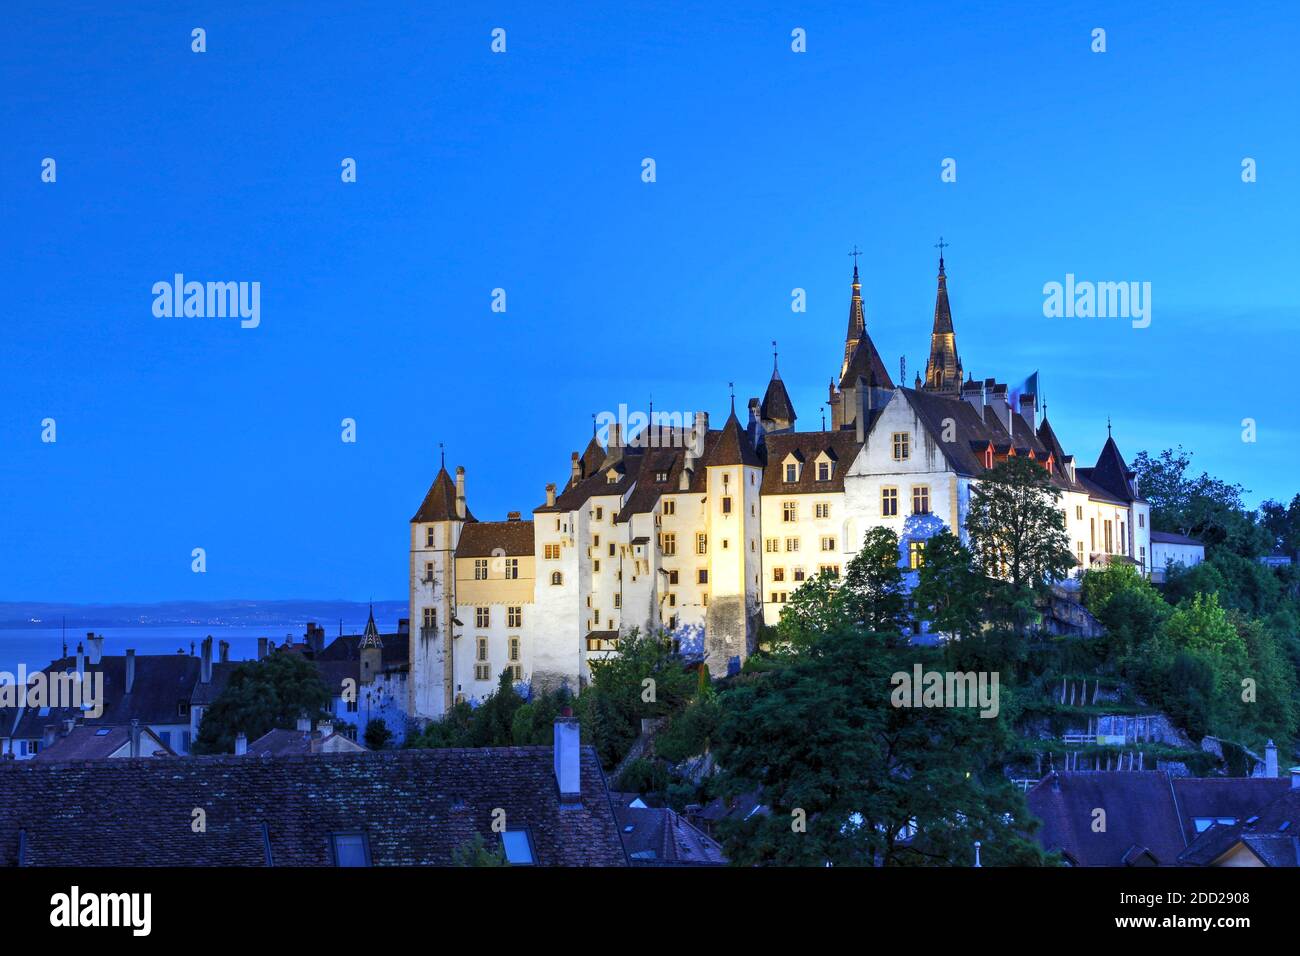 Skyline of Neuchatel, Switzerland featuring the Neuchatel Castle and the old town at night. Stock Photo